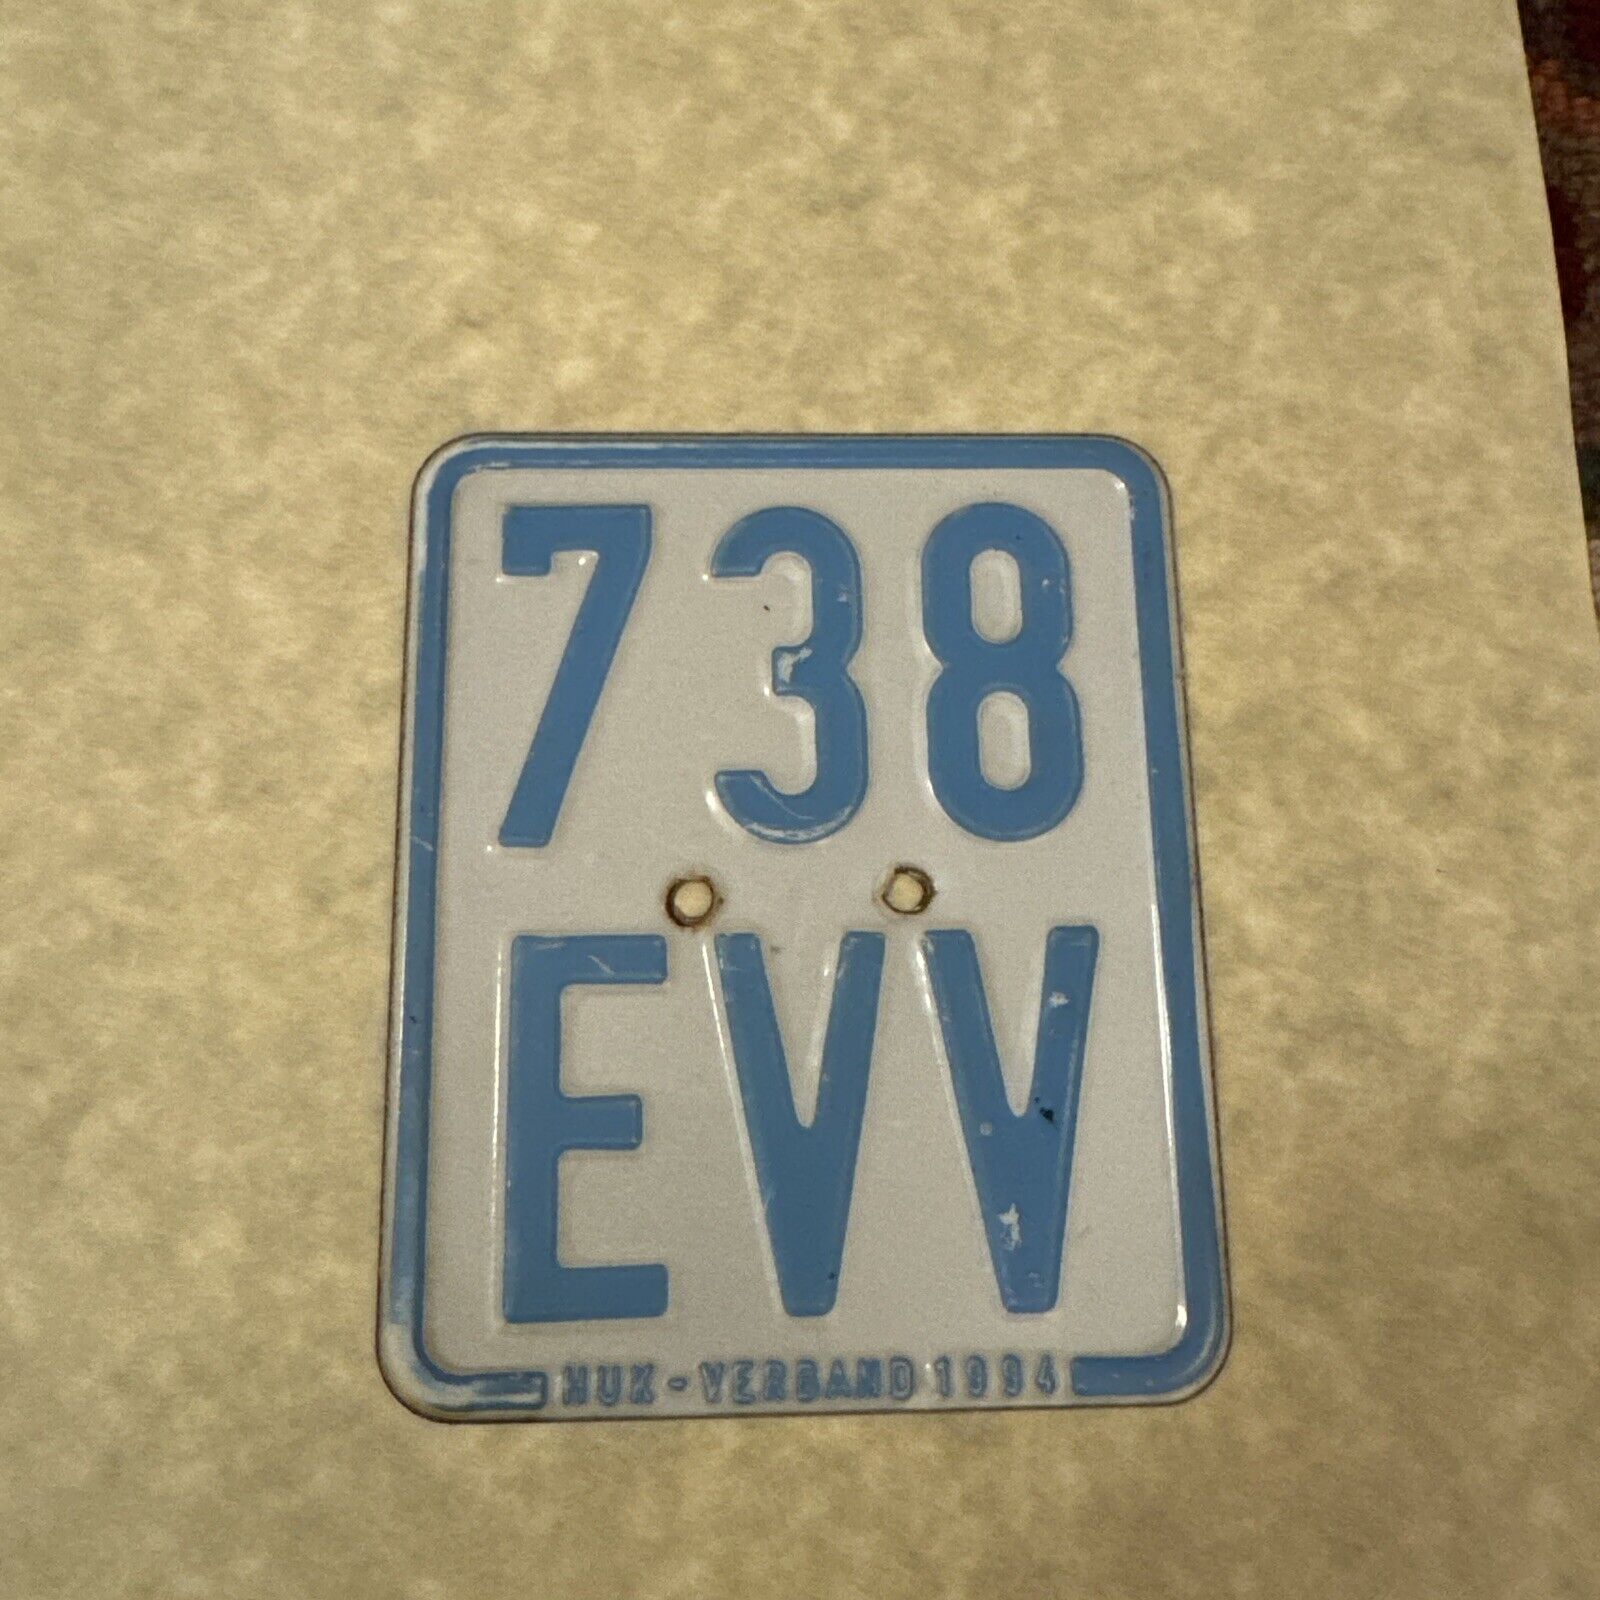 1994 Germany Moped License Plate🇩🇪 Huk Verband German Scooter 🛵 Tag 738 EVV